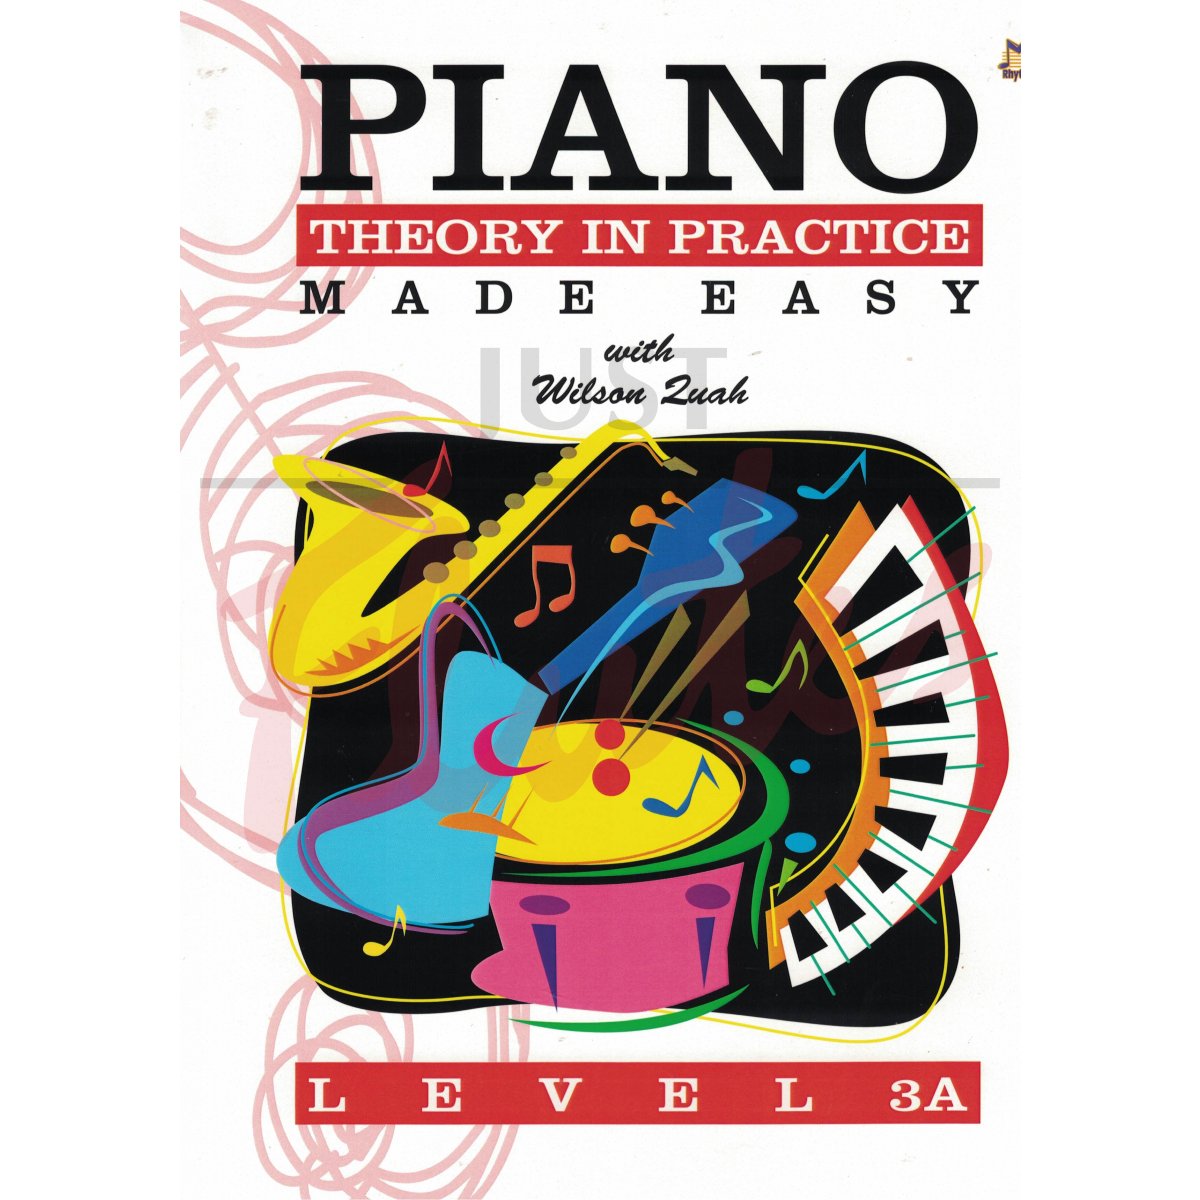 Piano Theory In Practice Made Easy Level 3A